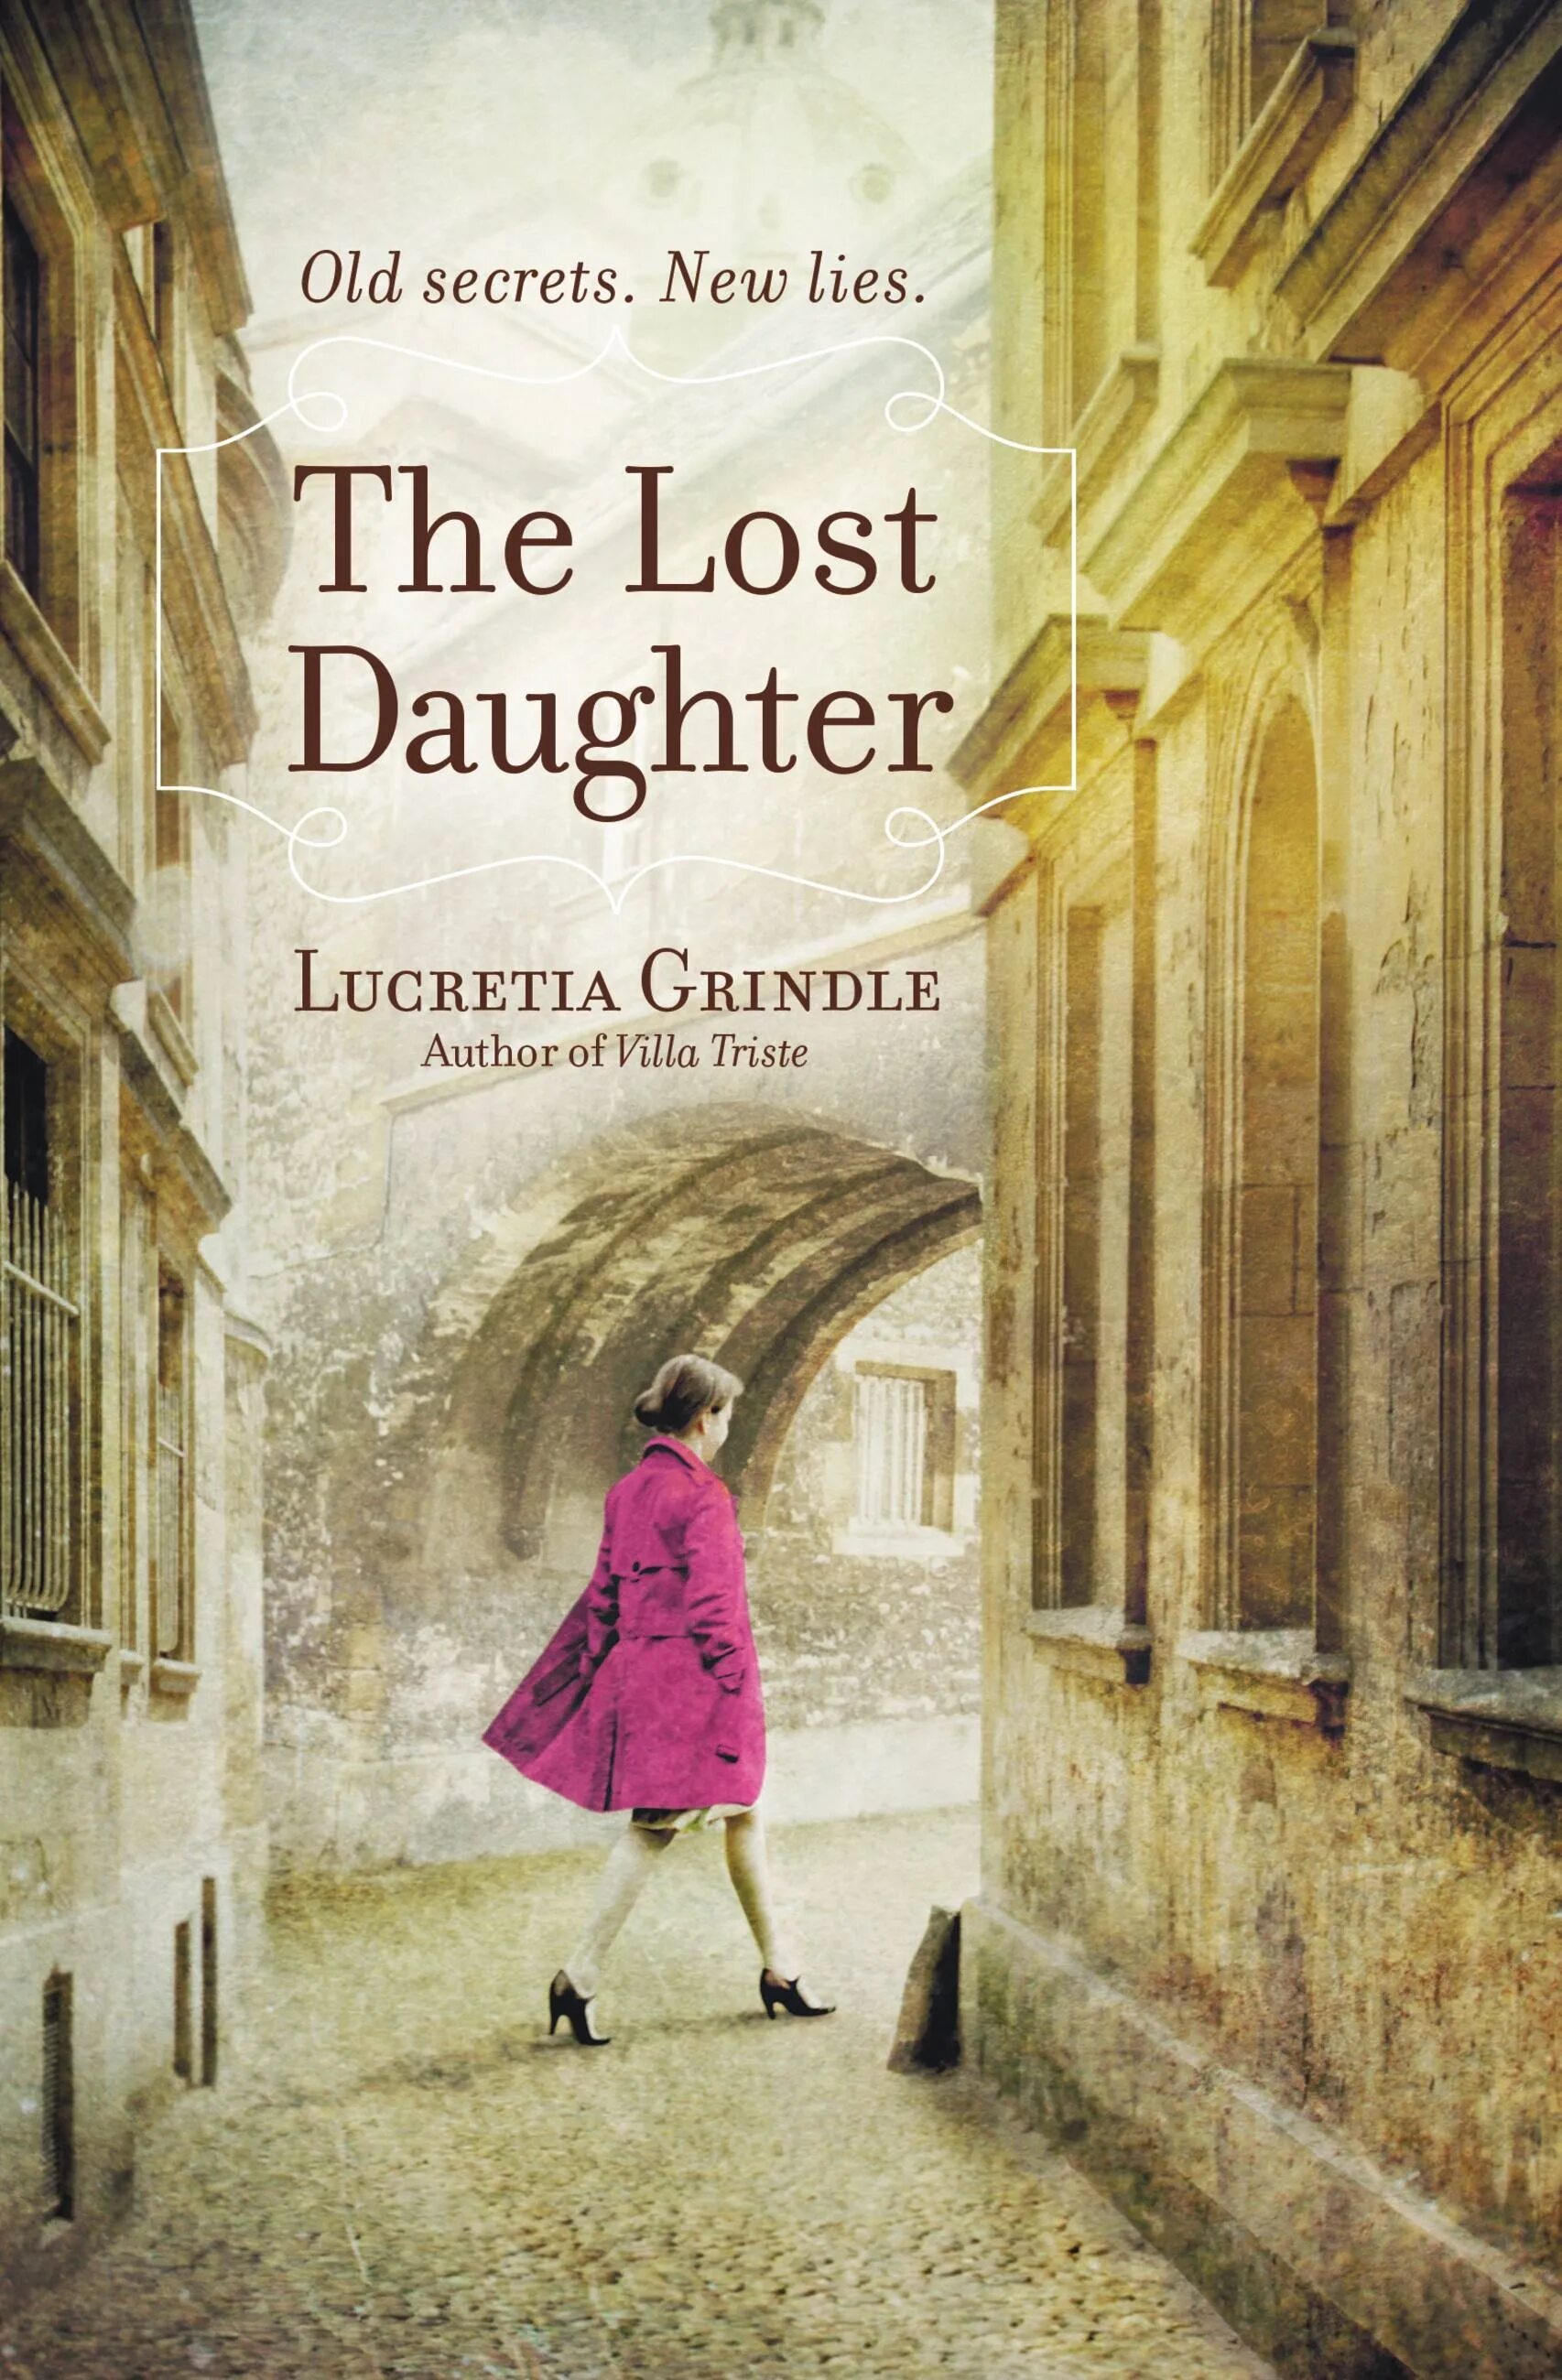 The Lost daughter 2021. Lost daughter Постер. Лукреций книги. The lost daughter